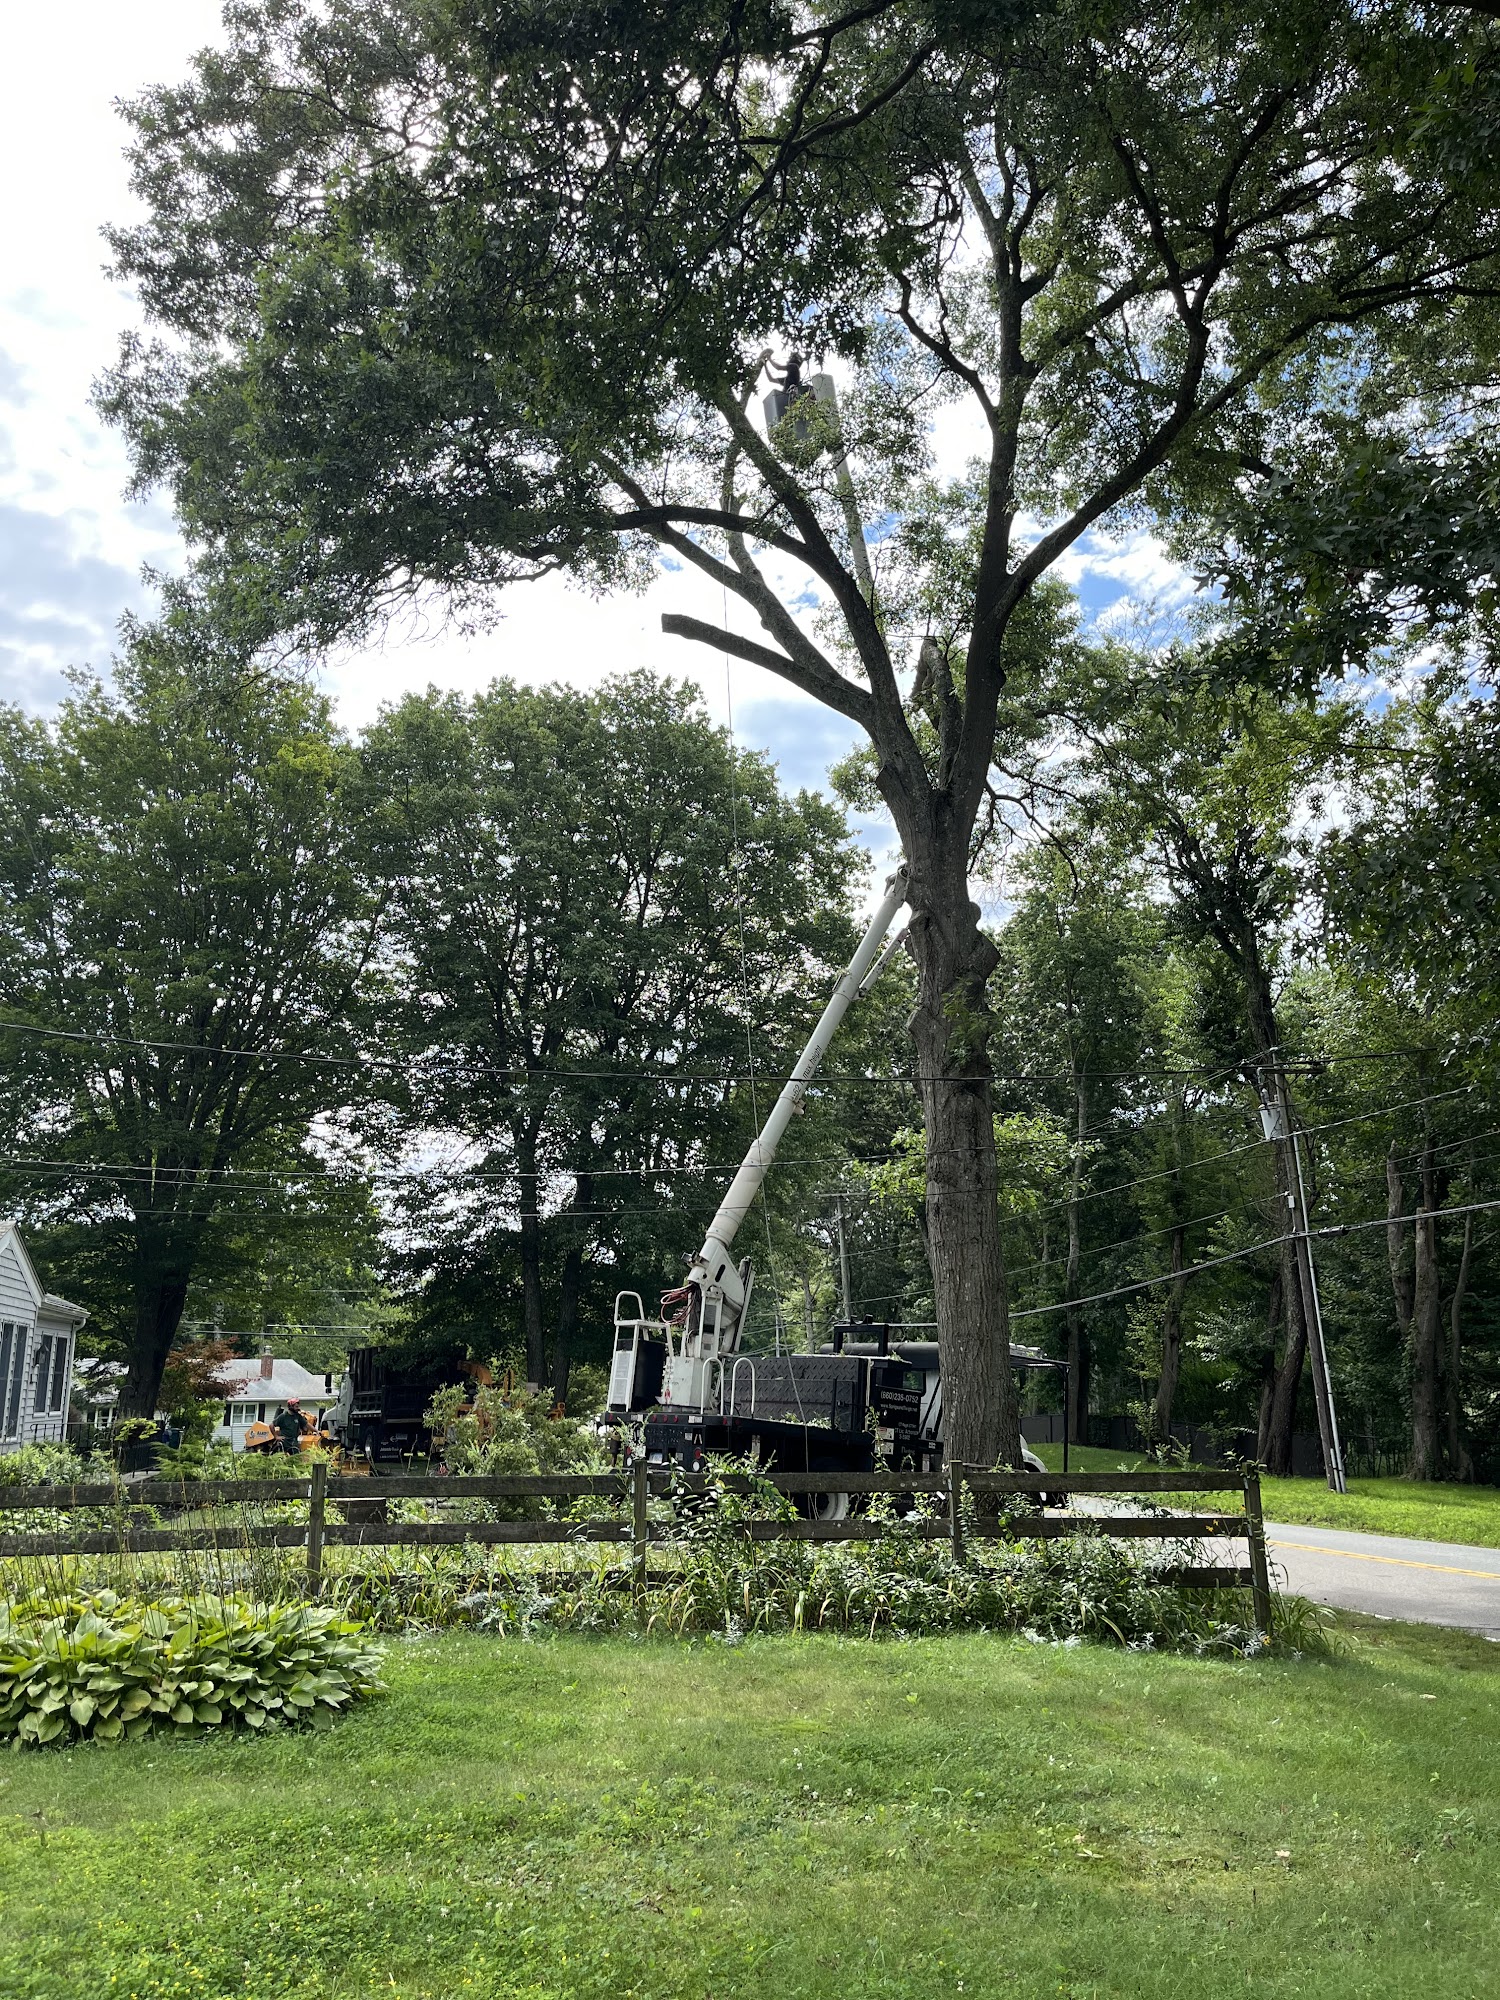 Sprigs & Twigs Landscaping 41 Kings Hwy, Gales Ferry Connecticut 06335